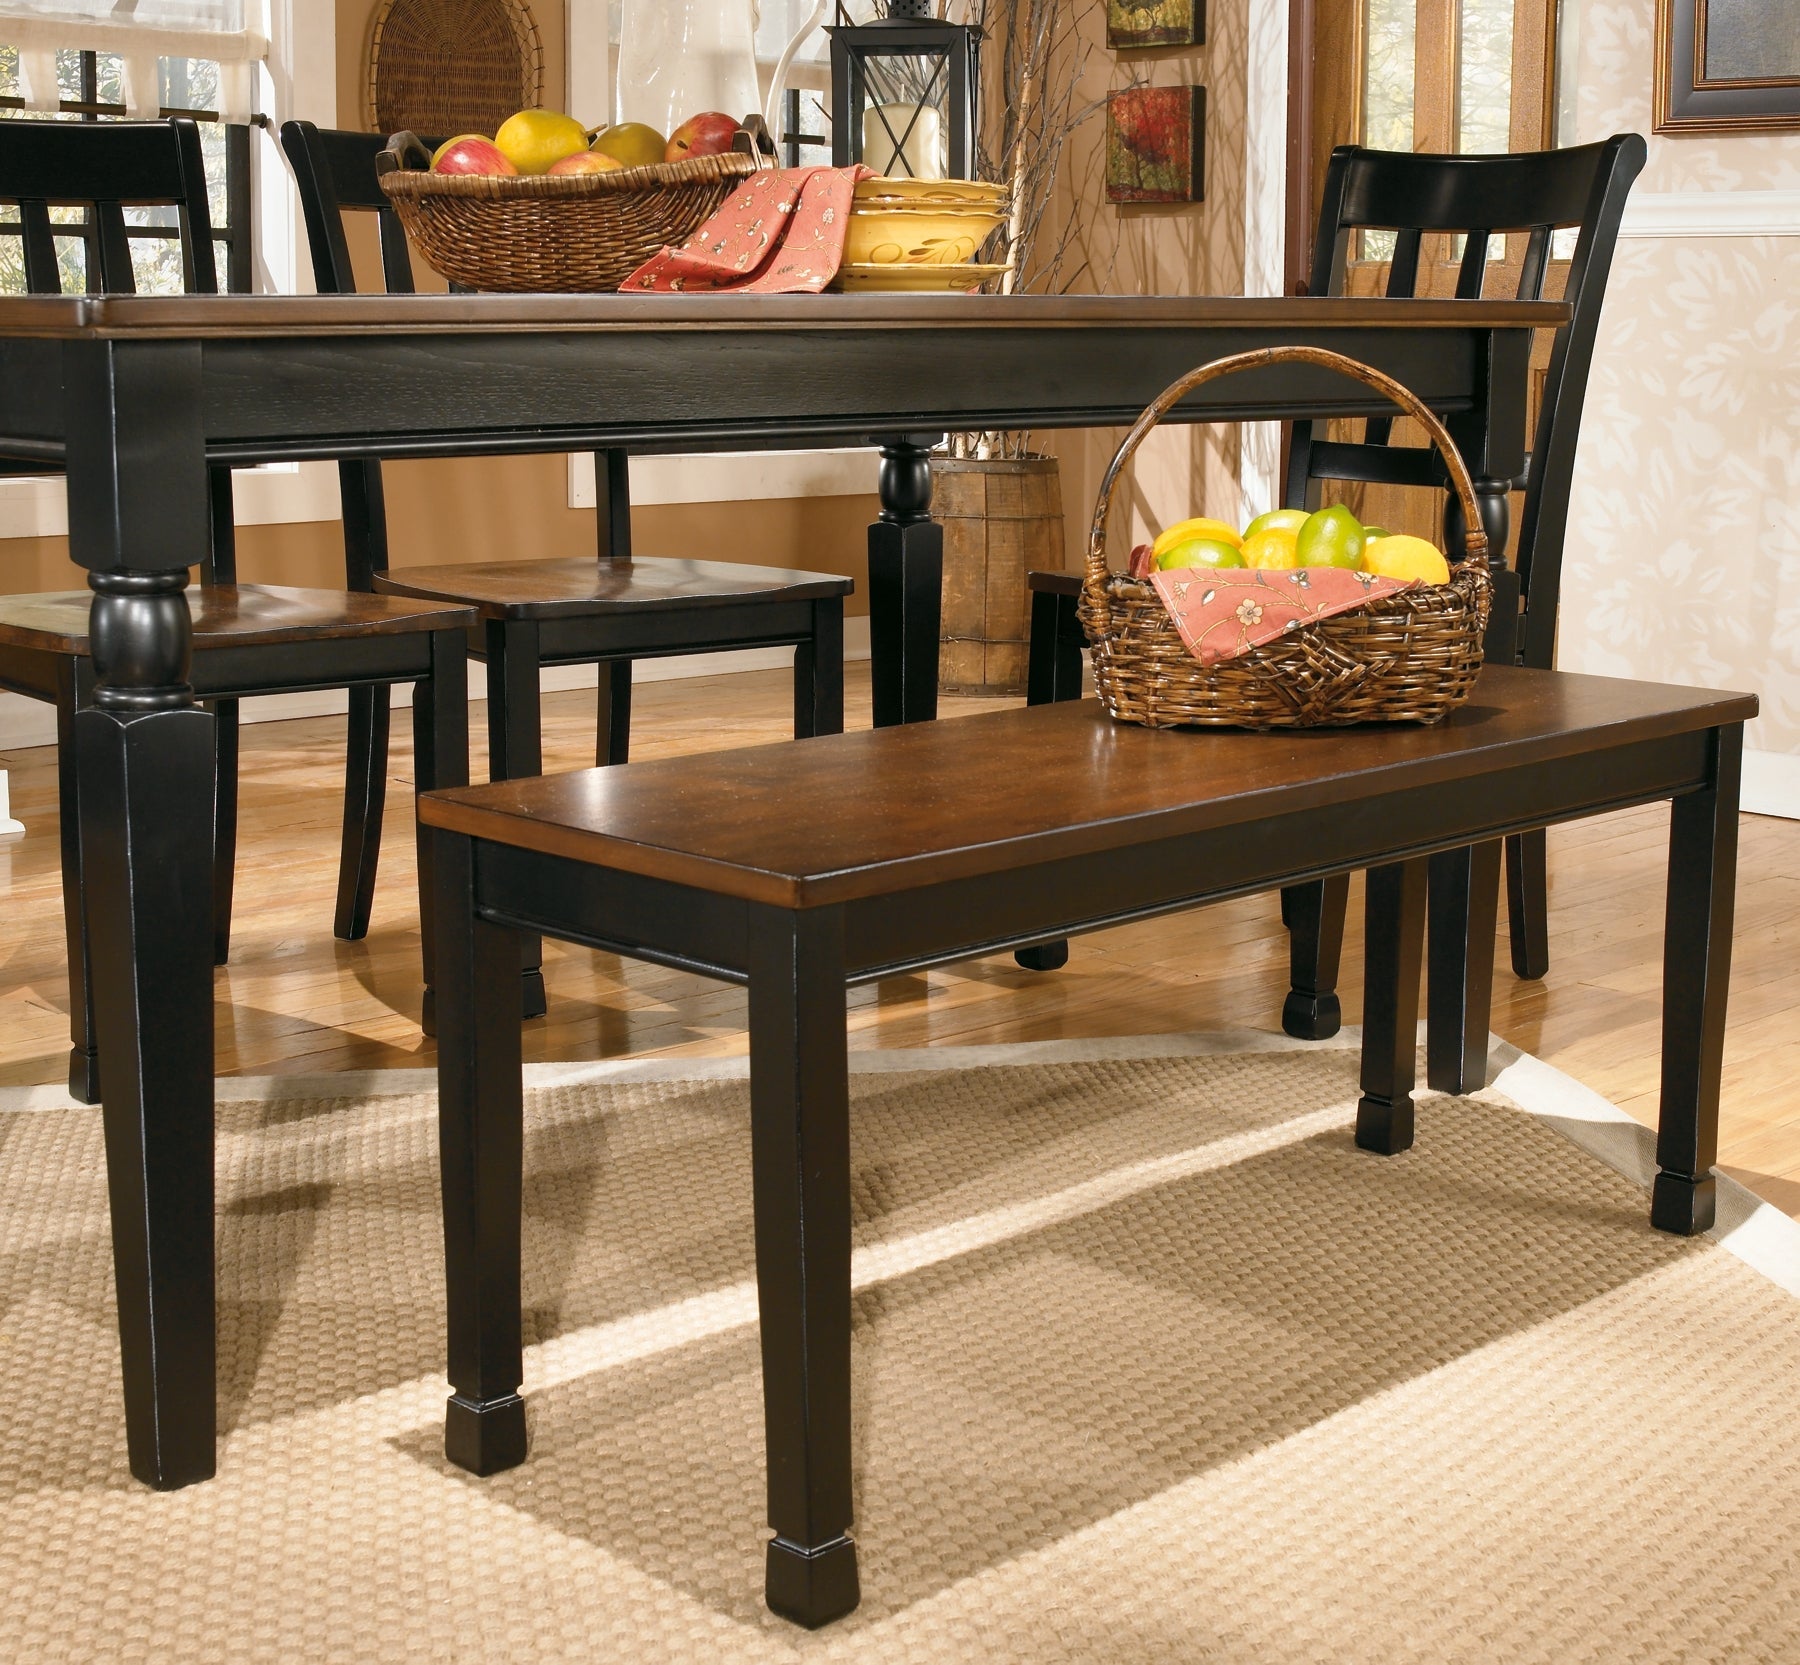 Owingsville Large Dining Room Bench at Cloud 9 Mattress & Furniture furniture, home furnishing, home decor